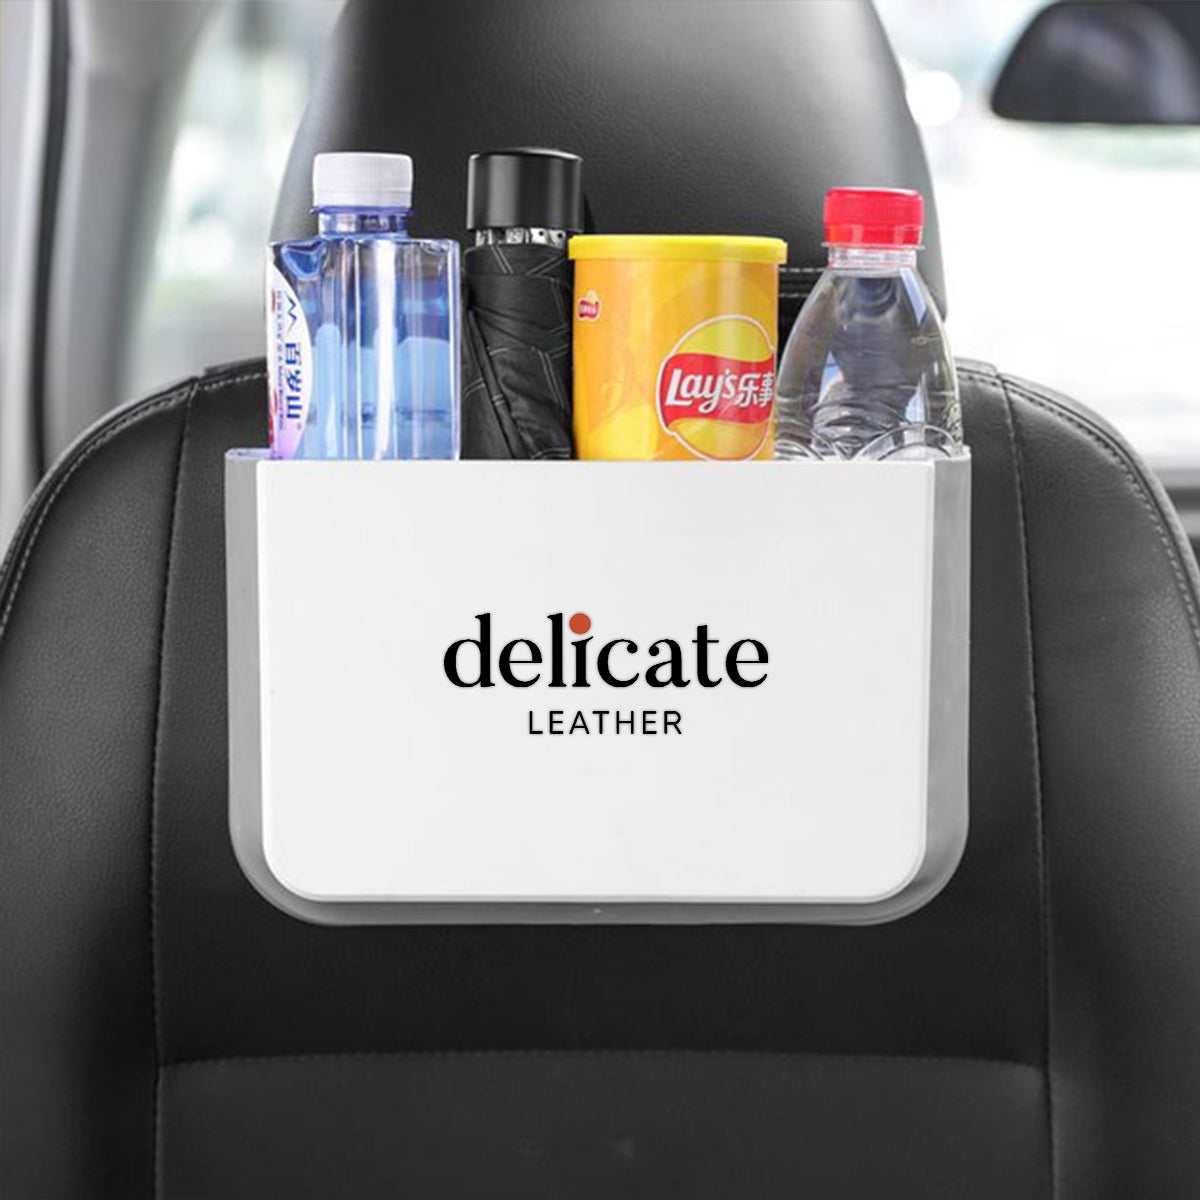 Delicate Leather Hanging Waterproof Car Trash can-Foldable, Custom For Your Cars, Waterproof, and Equipped with Cup Holders and Trays. Multi-Purpose, Car Accessories CA11992 - Delicate Leather